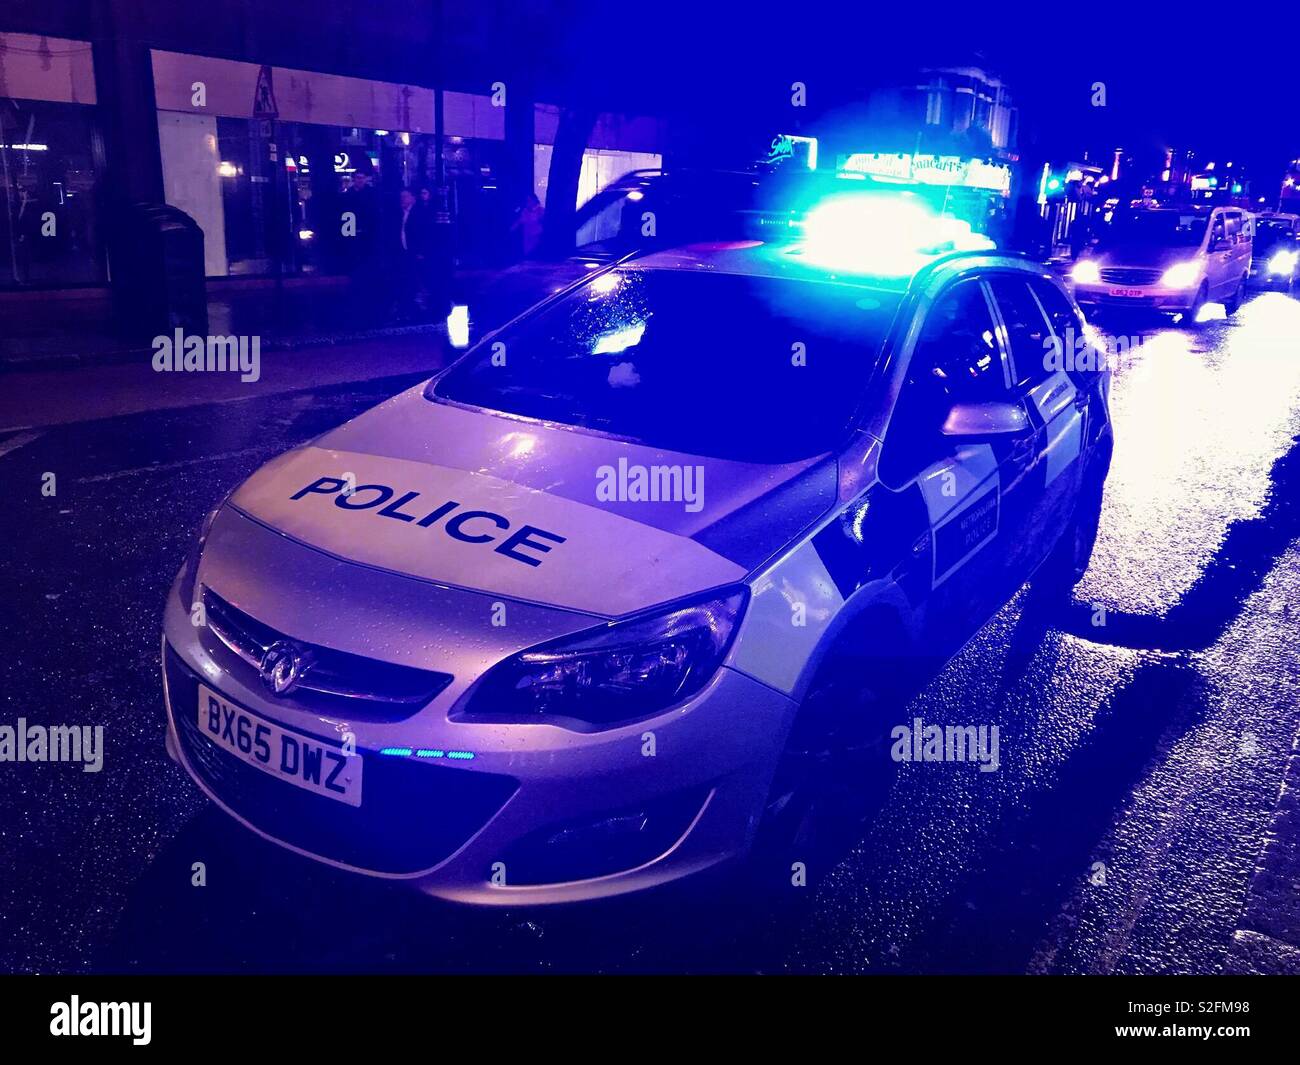 Police car parked on a city street at night with blue lights flashing Stock Photo